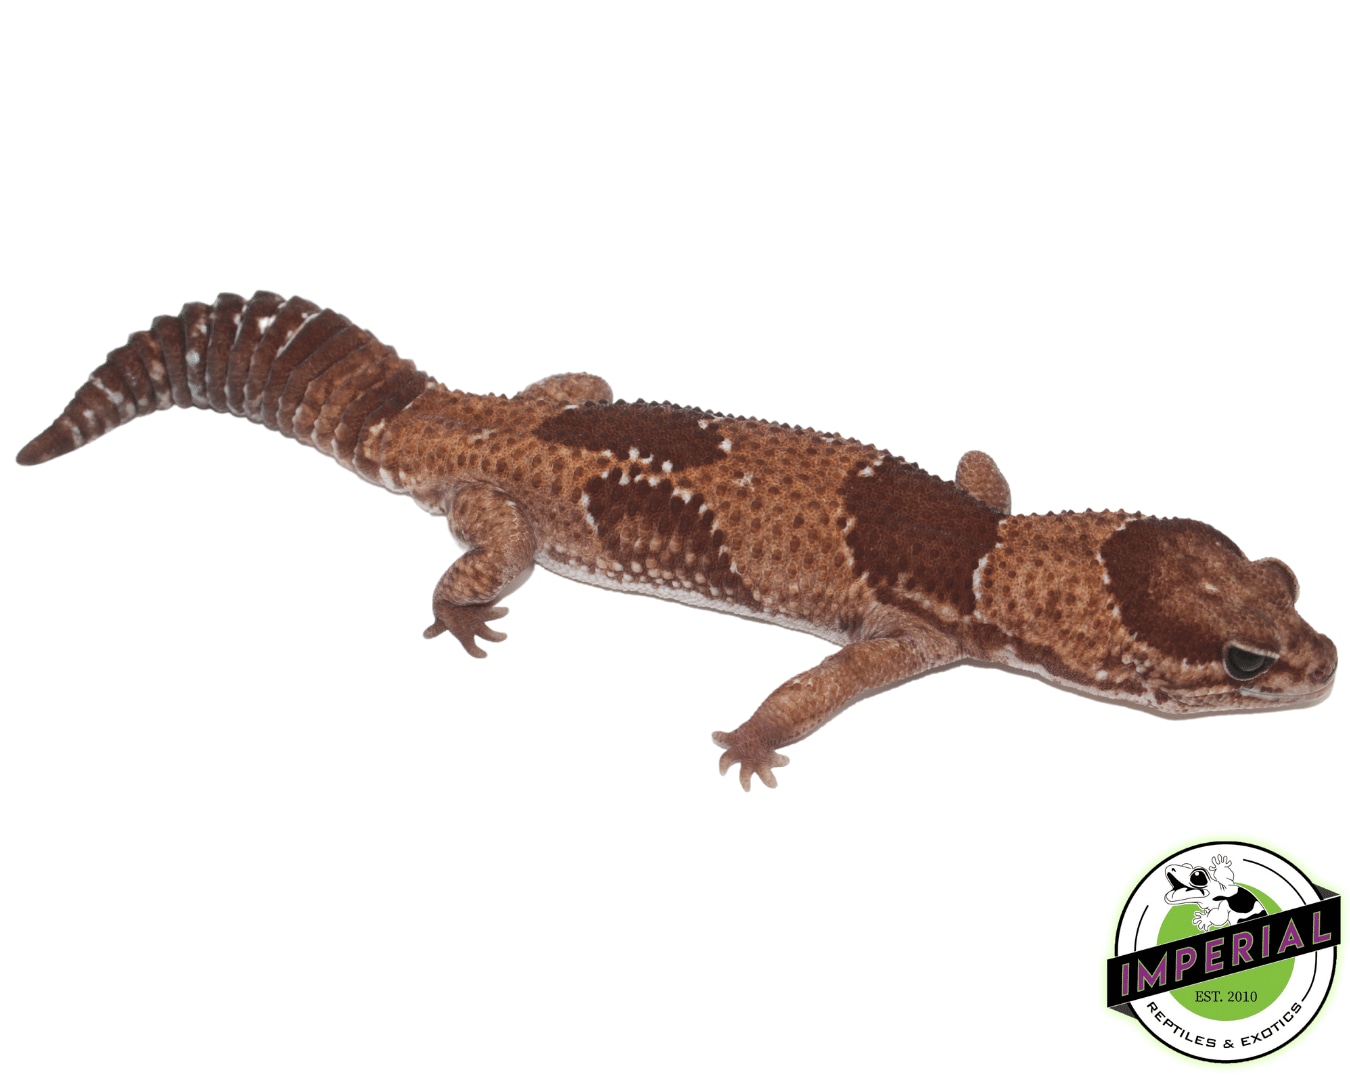 Jungle "Aberrant African Fat-Tailed Gecko by Imperial Reptiles & Exotics, LLC